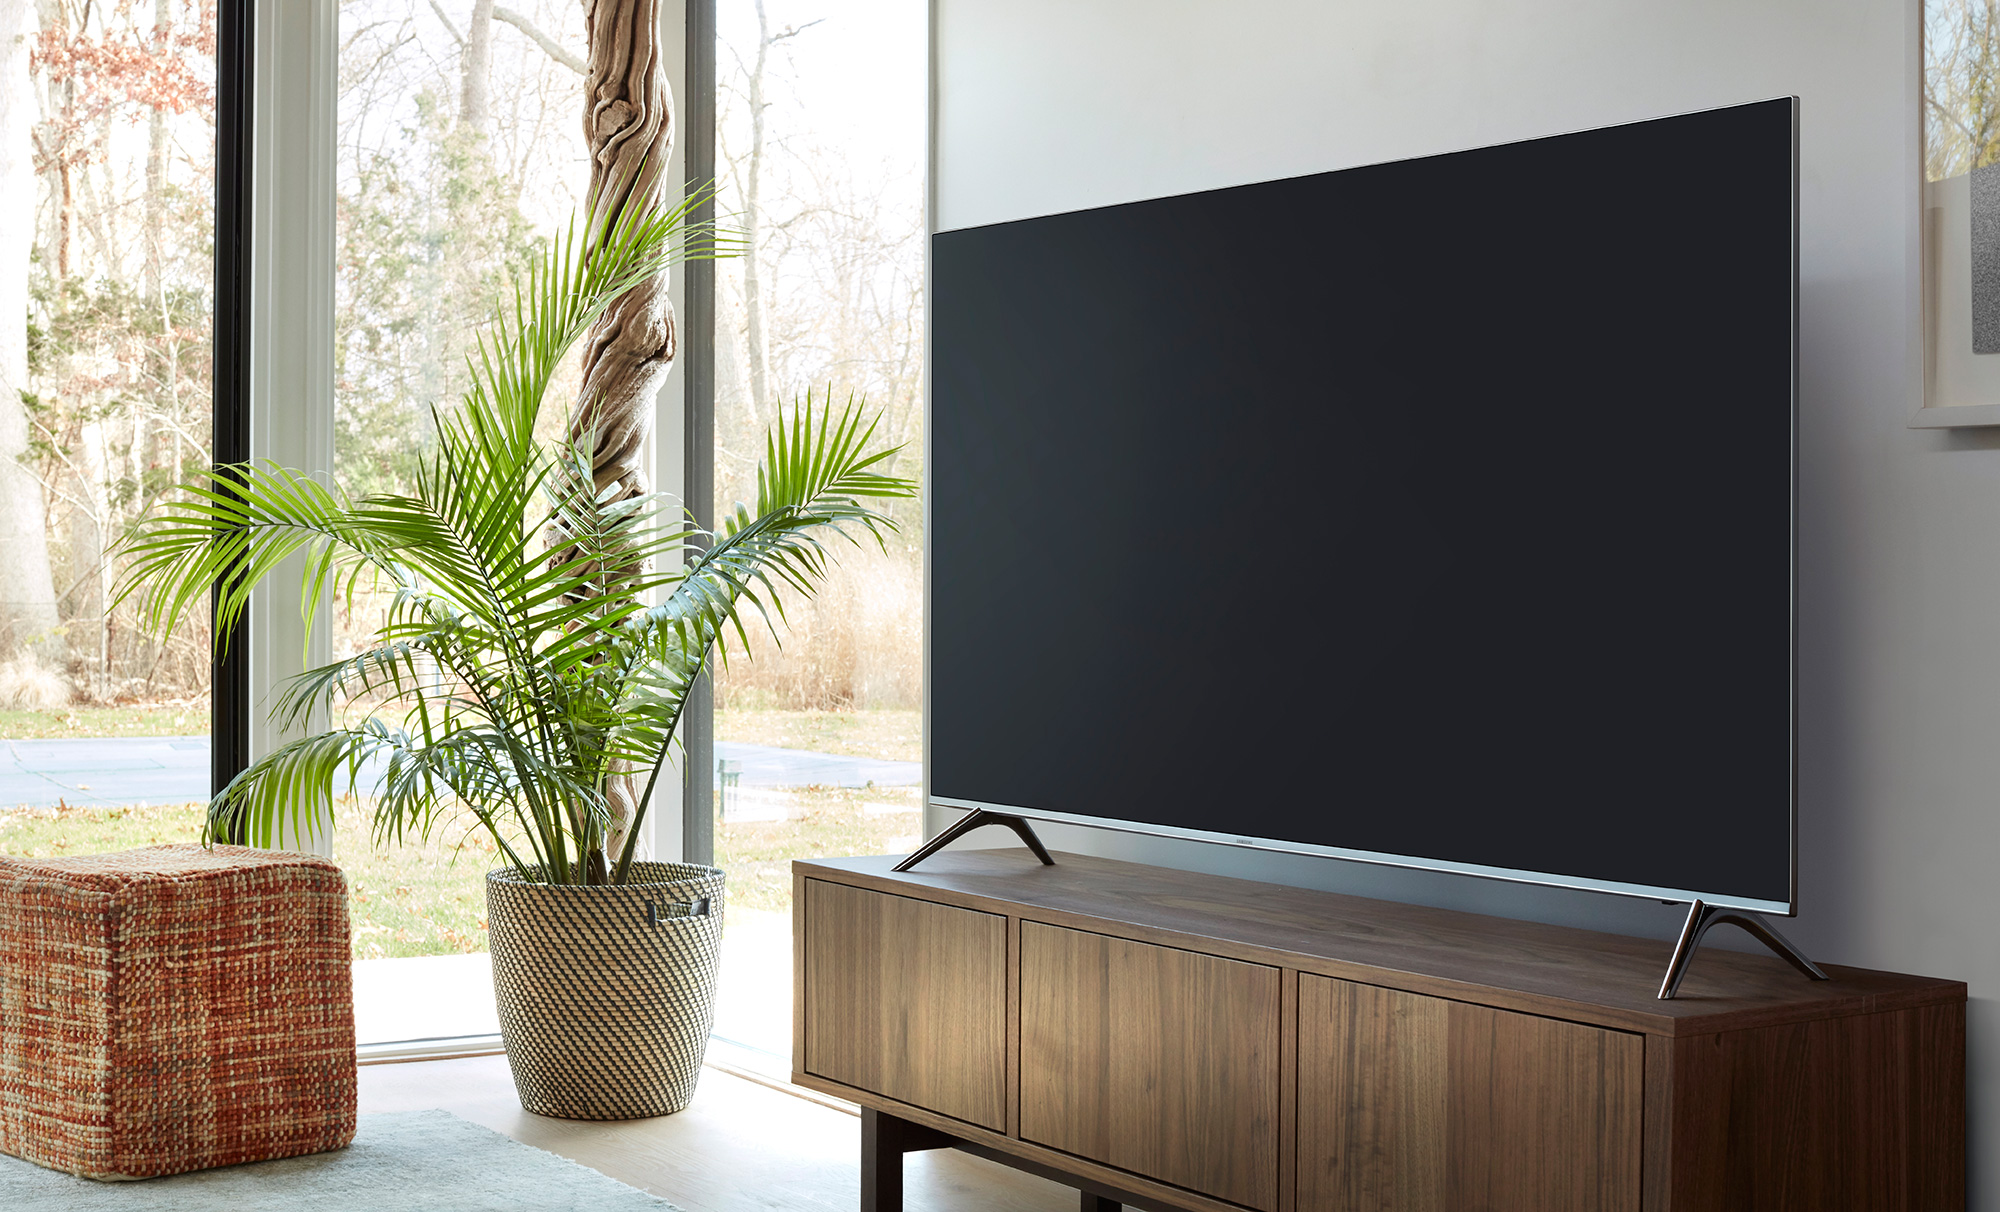 The Samsung KS7000 Flat SUHD TV is available now in 49” and 55” models, retailing at $2,499 and $3,899 respectively at all authorised Samsung dealers.